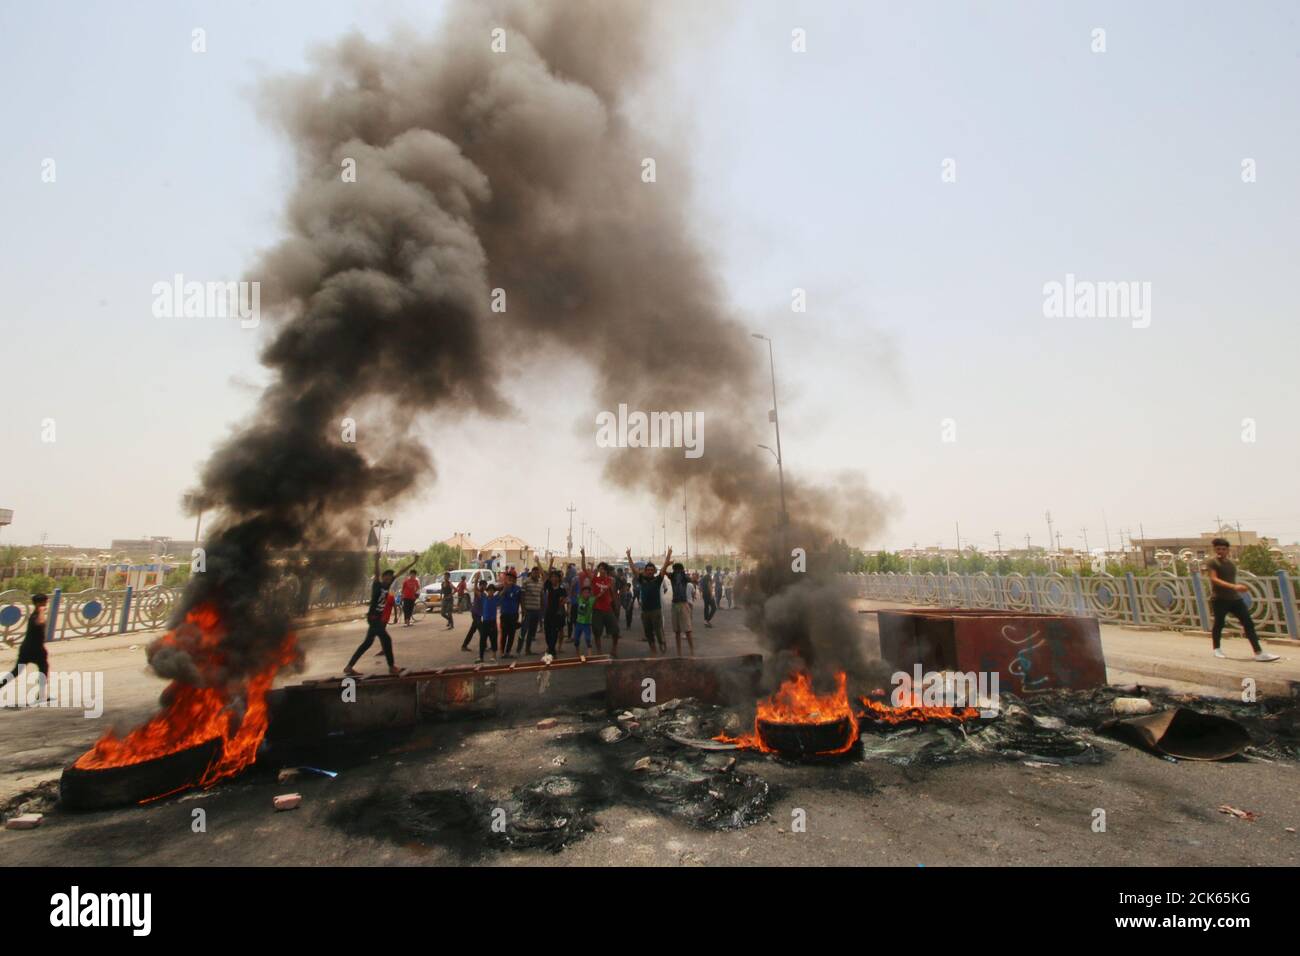 Iraqi protesters burn tires and block the road at the entrance to the city of Basra, Iraq July 12, 2018. REUTERS/Essam al-Sudani Stock Photo